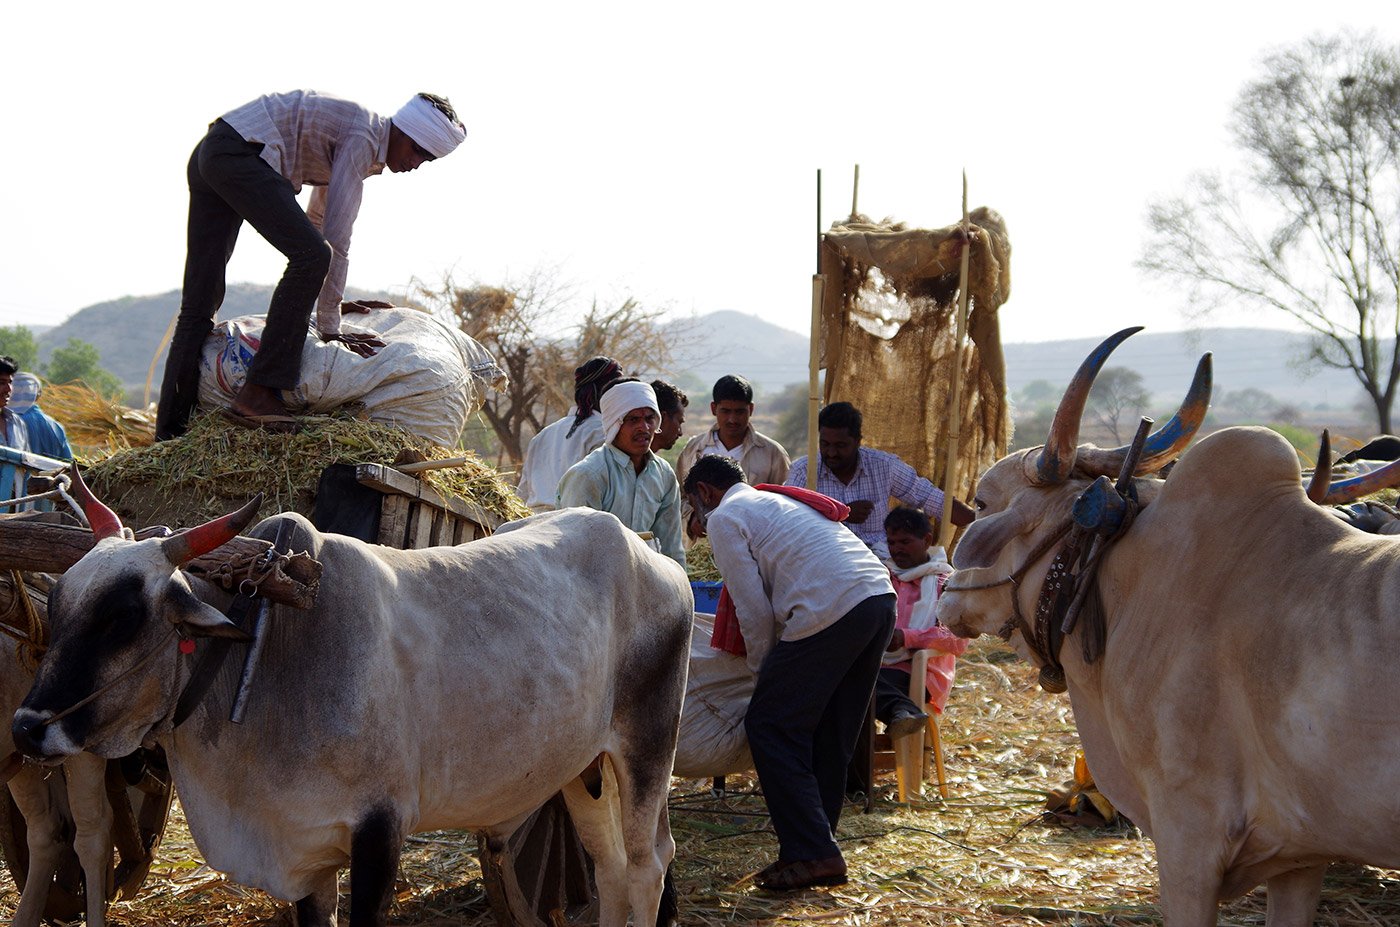 Helpers working to protect cows from heat and drought in one of the biggest cattle camps in Maharashtra.